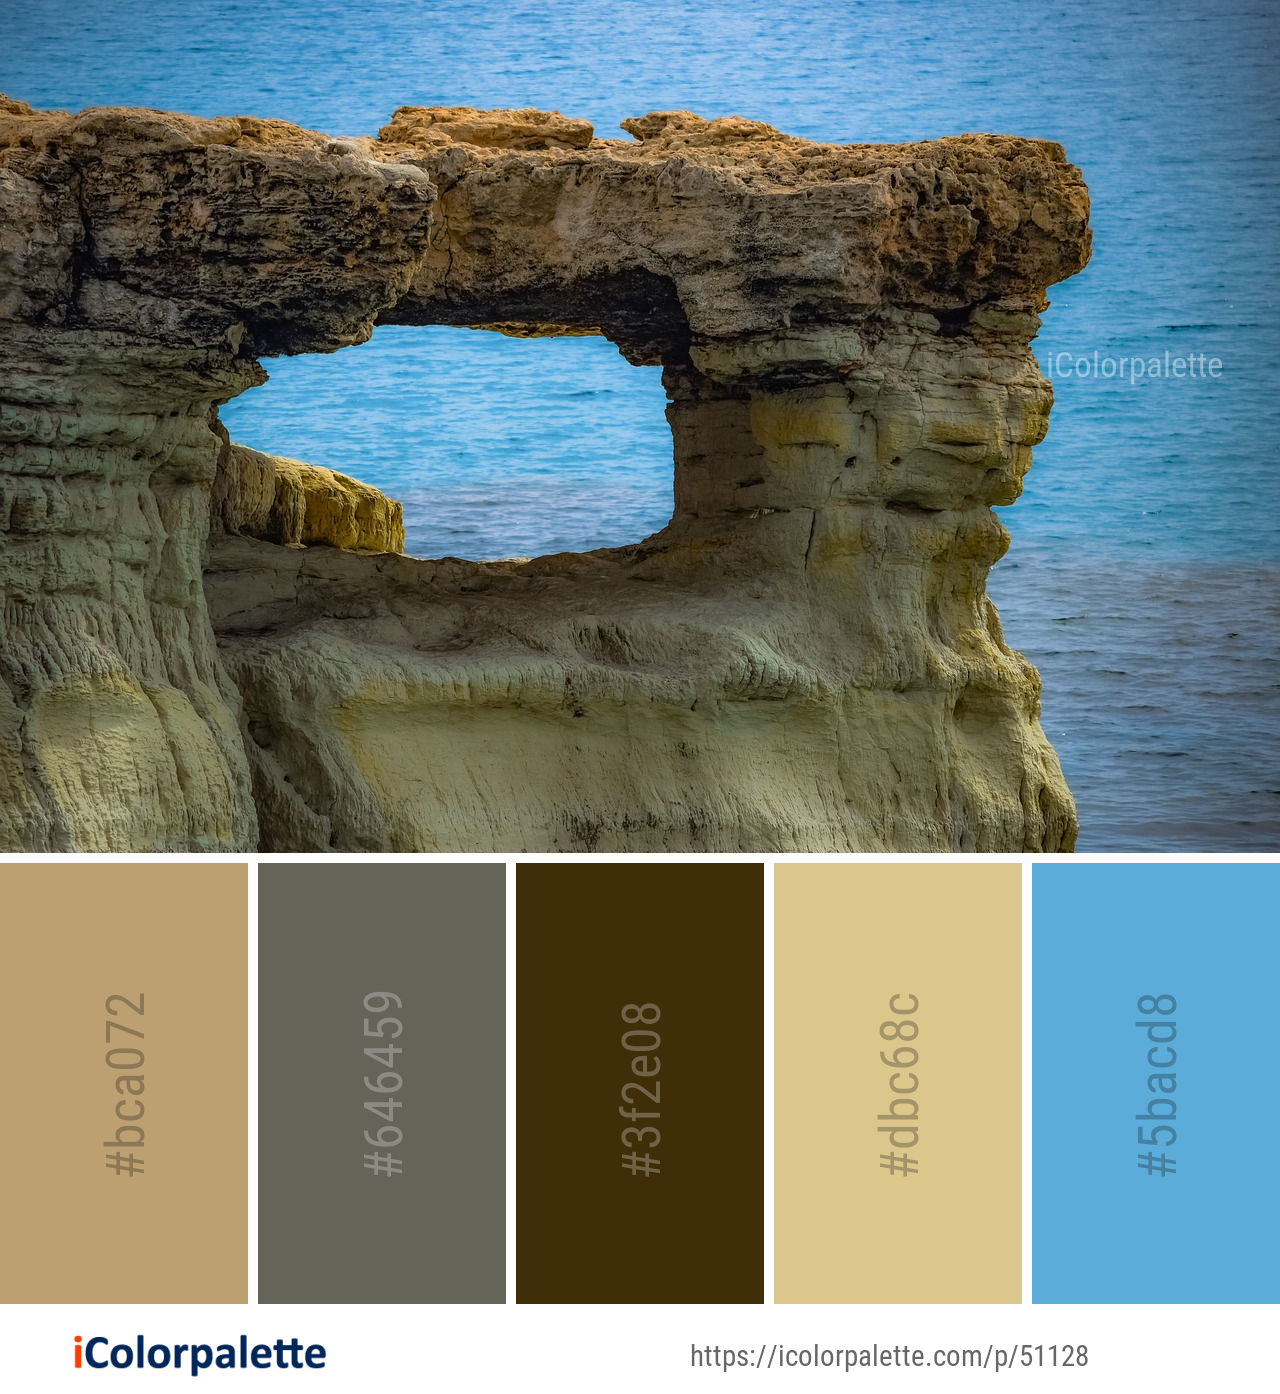 Color Palette Ideas from Rock Sea Natural Arch Image | iColorpalette